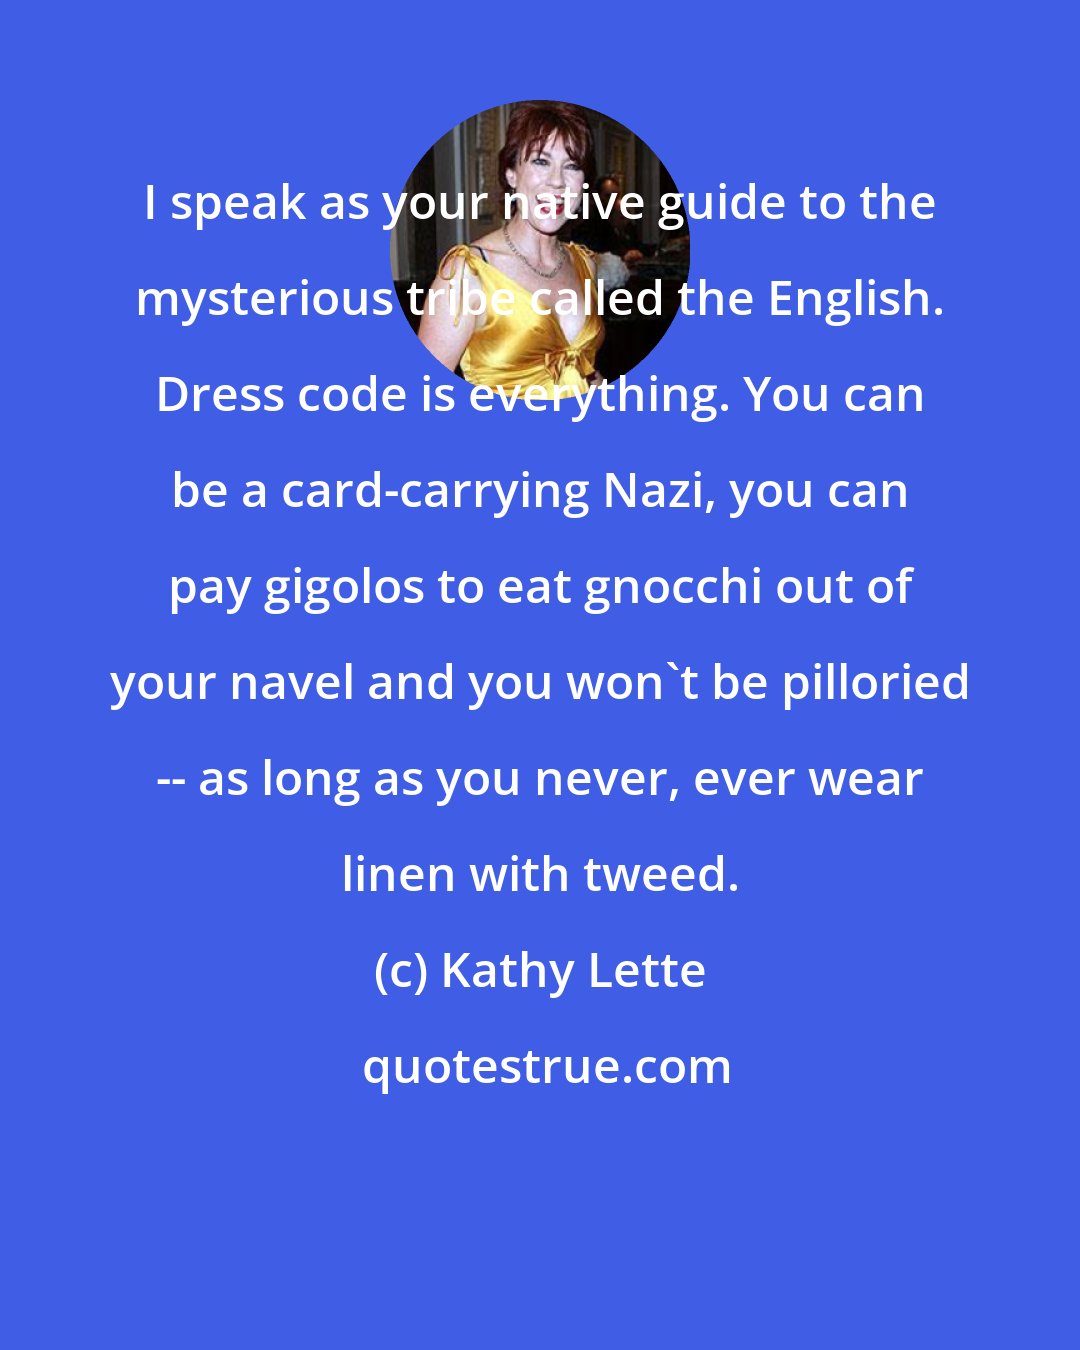 Kathy Lette: I speak as your native guide to the mysterious tribe called the English. Dress code is everything. You can be a card-carrying Nazi, you can pay gigolos to eat gnocchi out of your navel and you won't be pilloried -- as long as you never, ever wear linen with tweed.